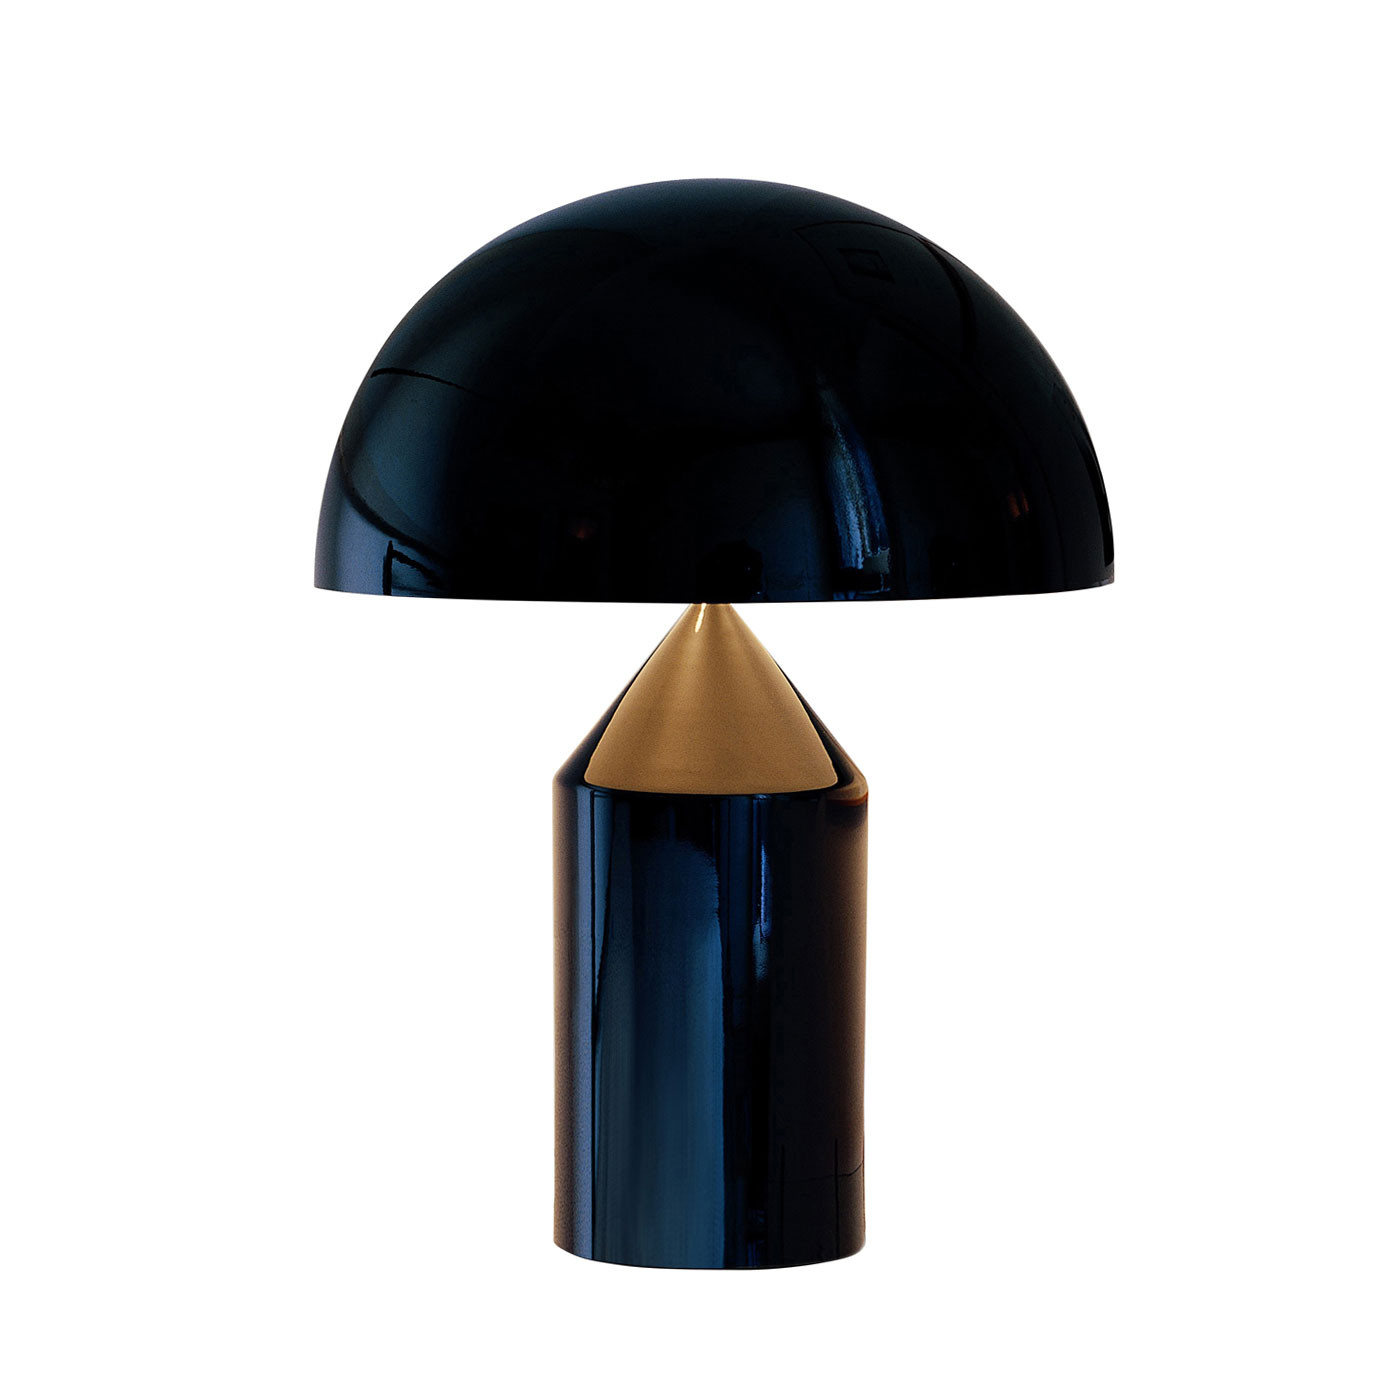 Oluce Atollo 239 Metal At Nostraforma, Iconic Table Lamps